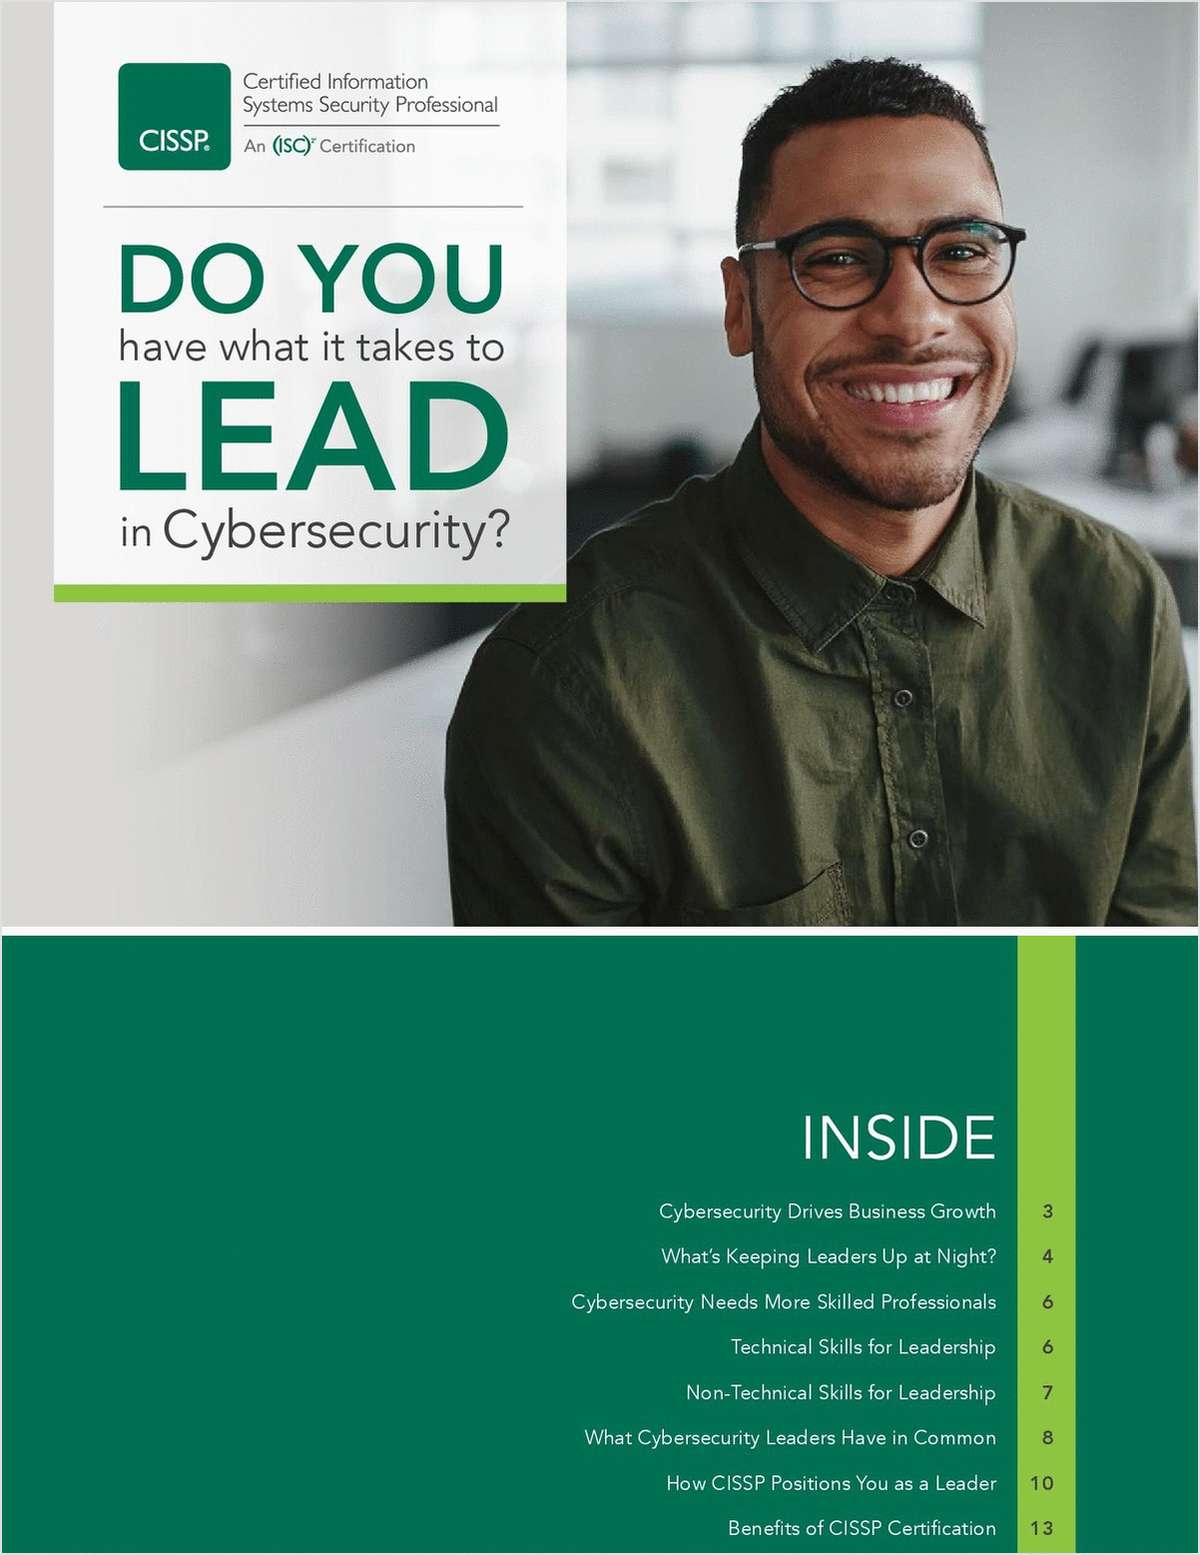 Do You Have What it Takes to Lead in Cybersecurity?